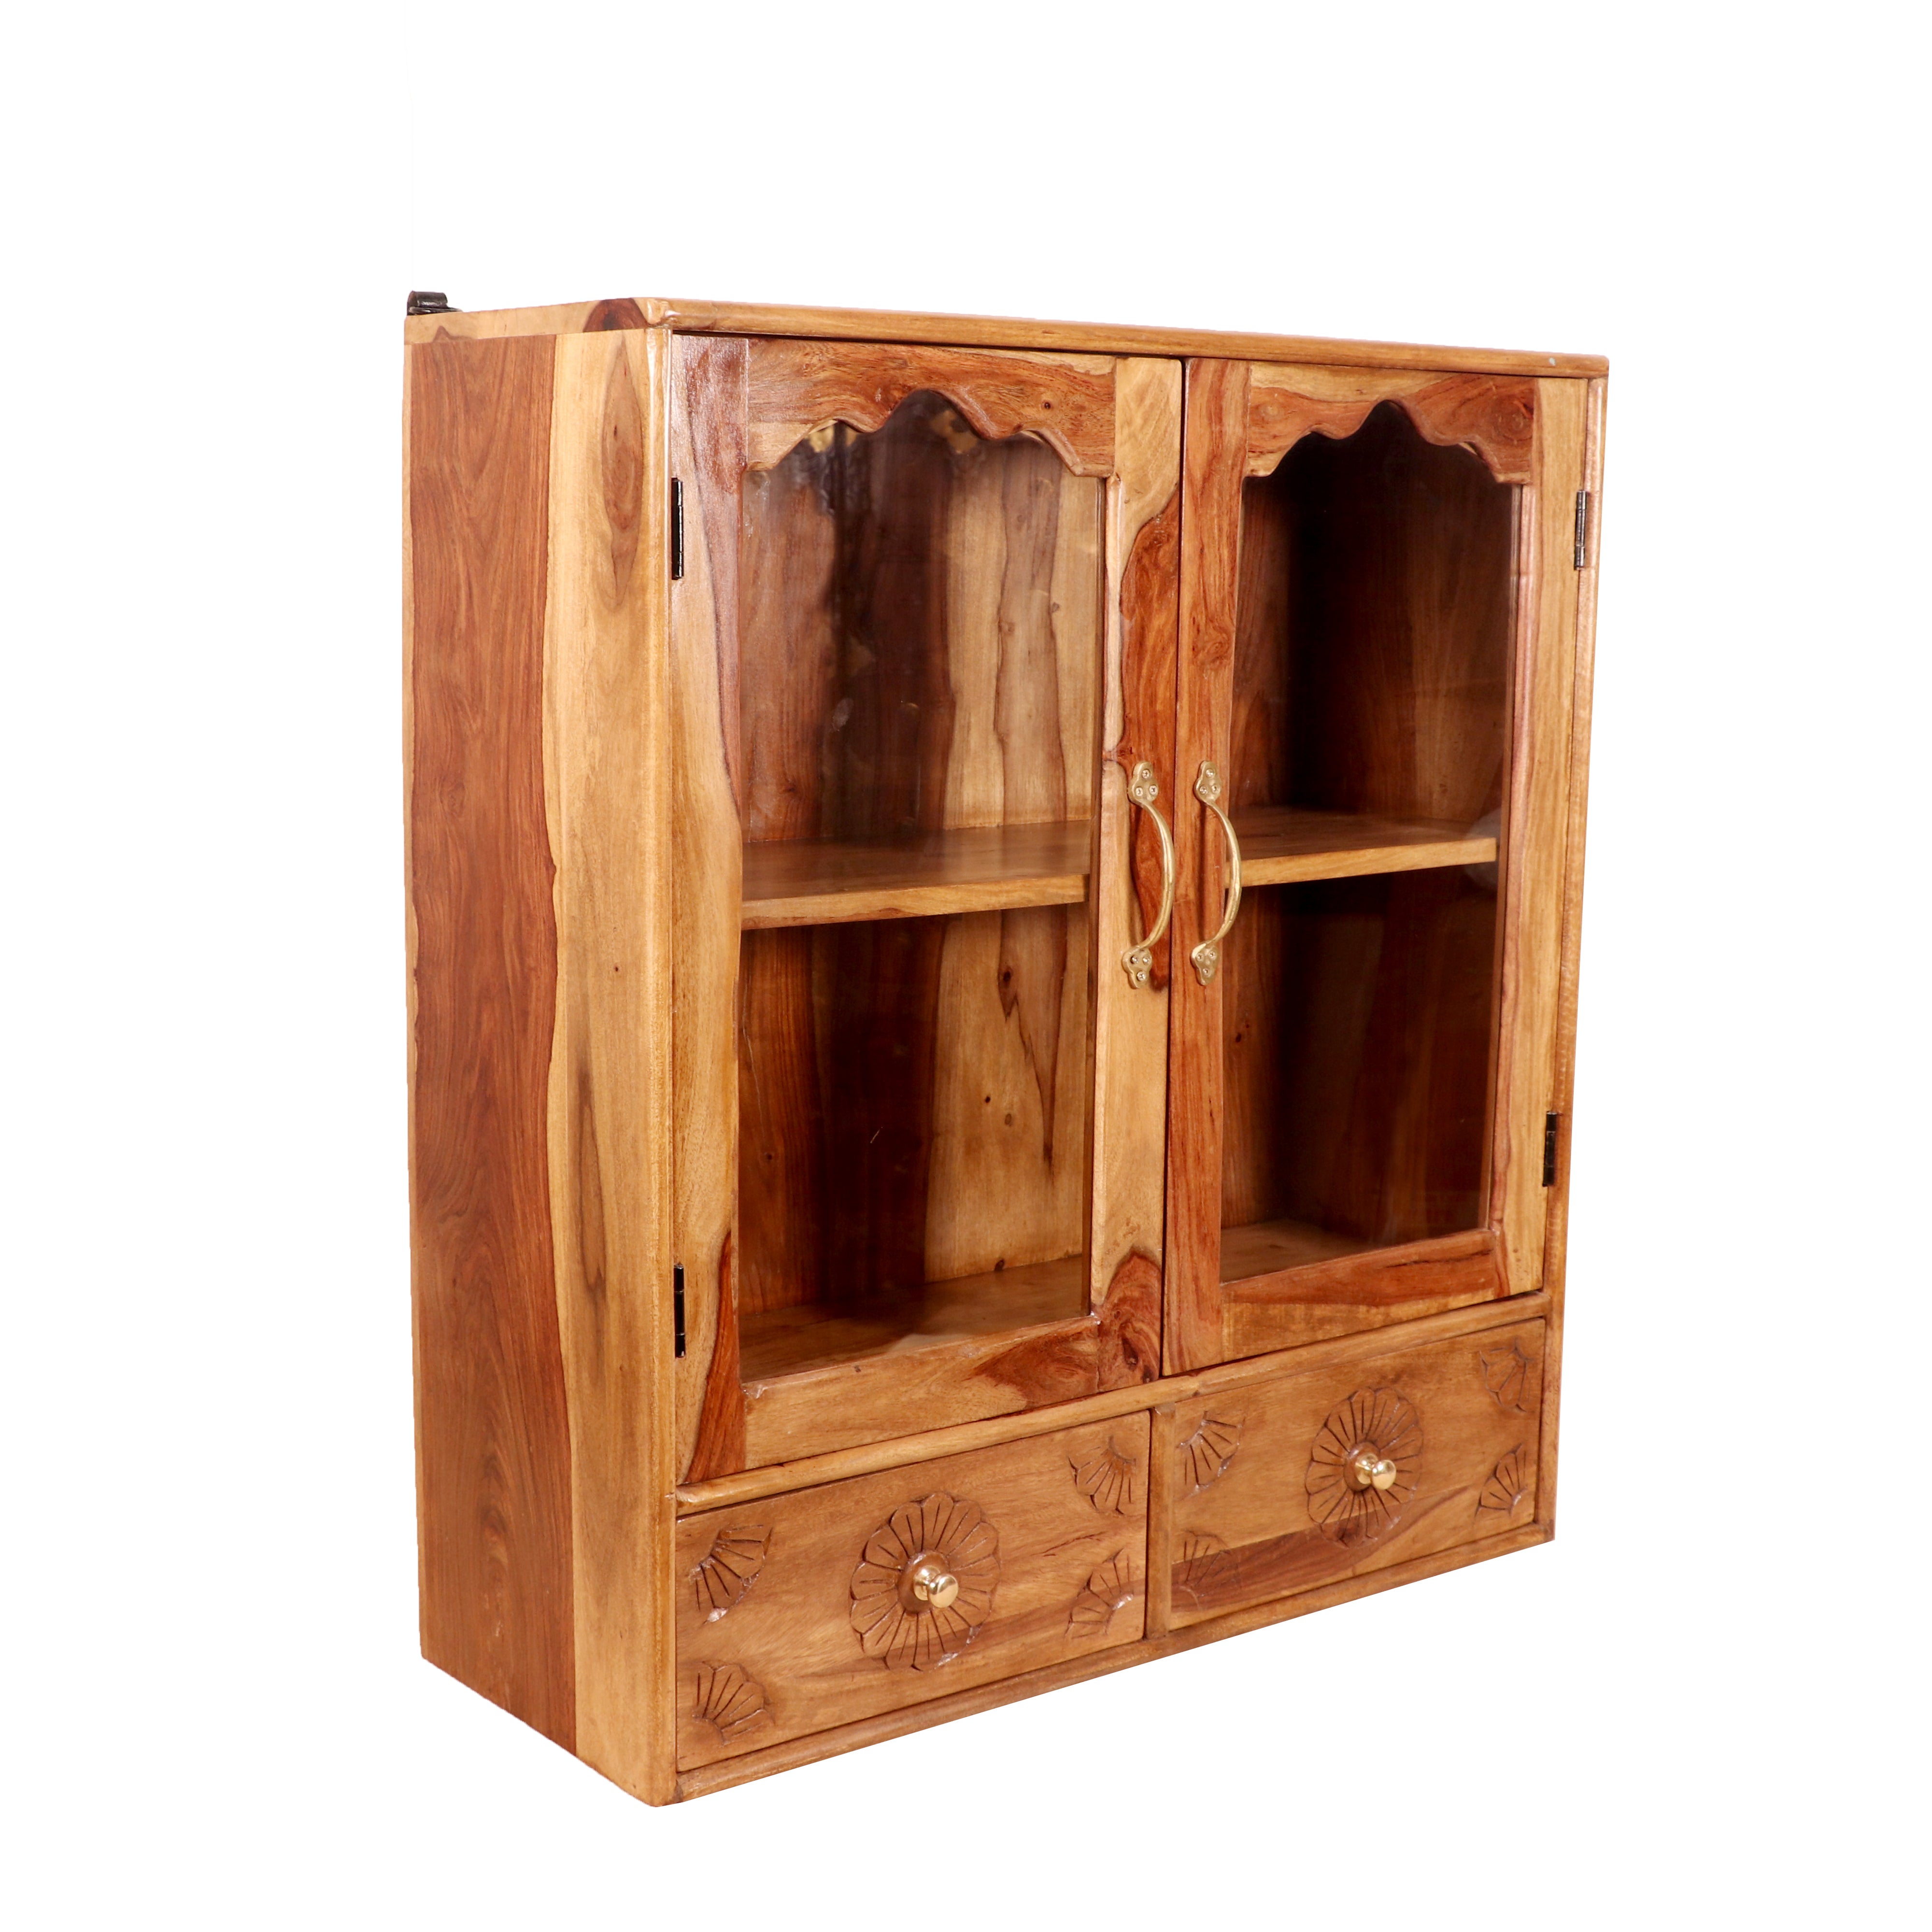 Ironic Traditional Designed Handmade Double Drawer Wooden Cabinet for Home Wall Cabinet